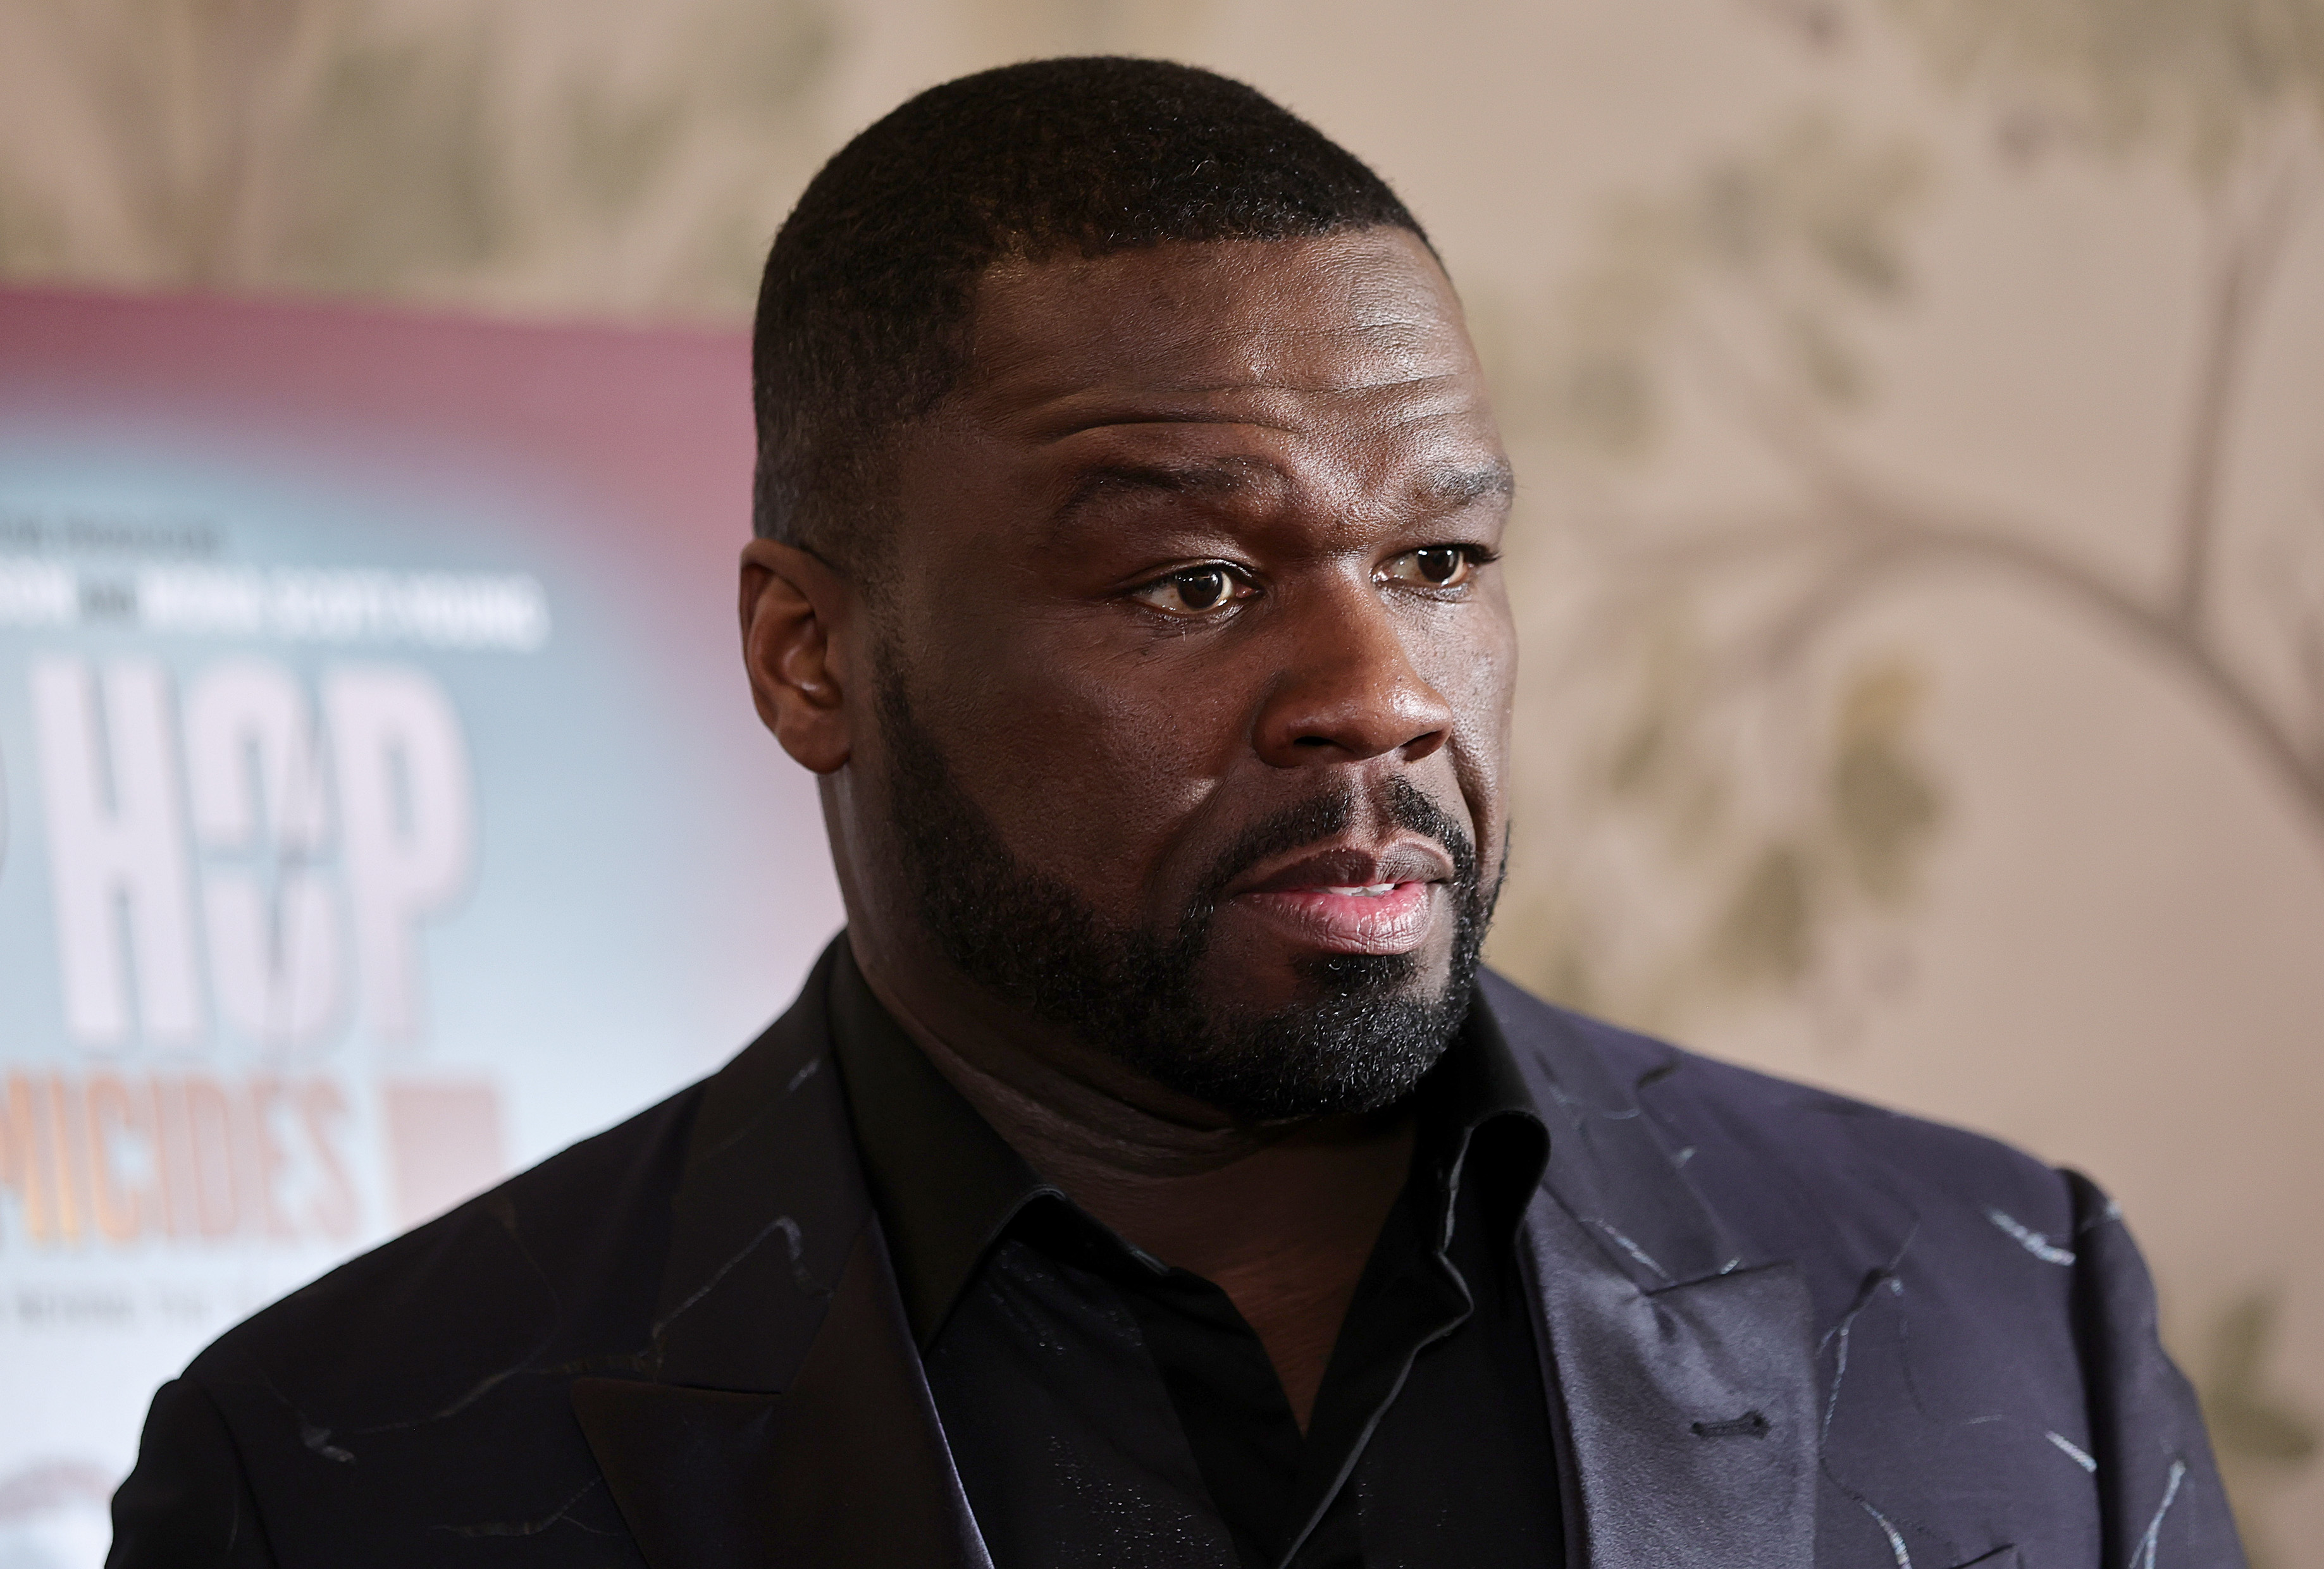 50 Cent (Getty Images)